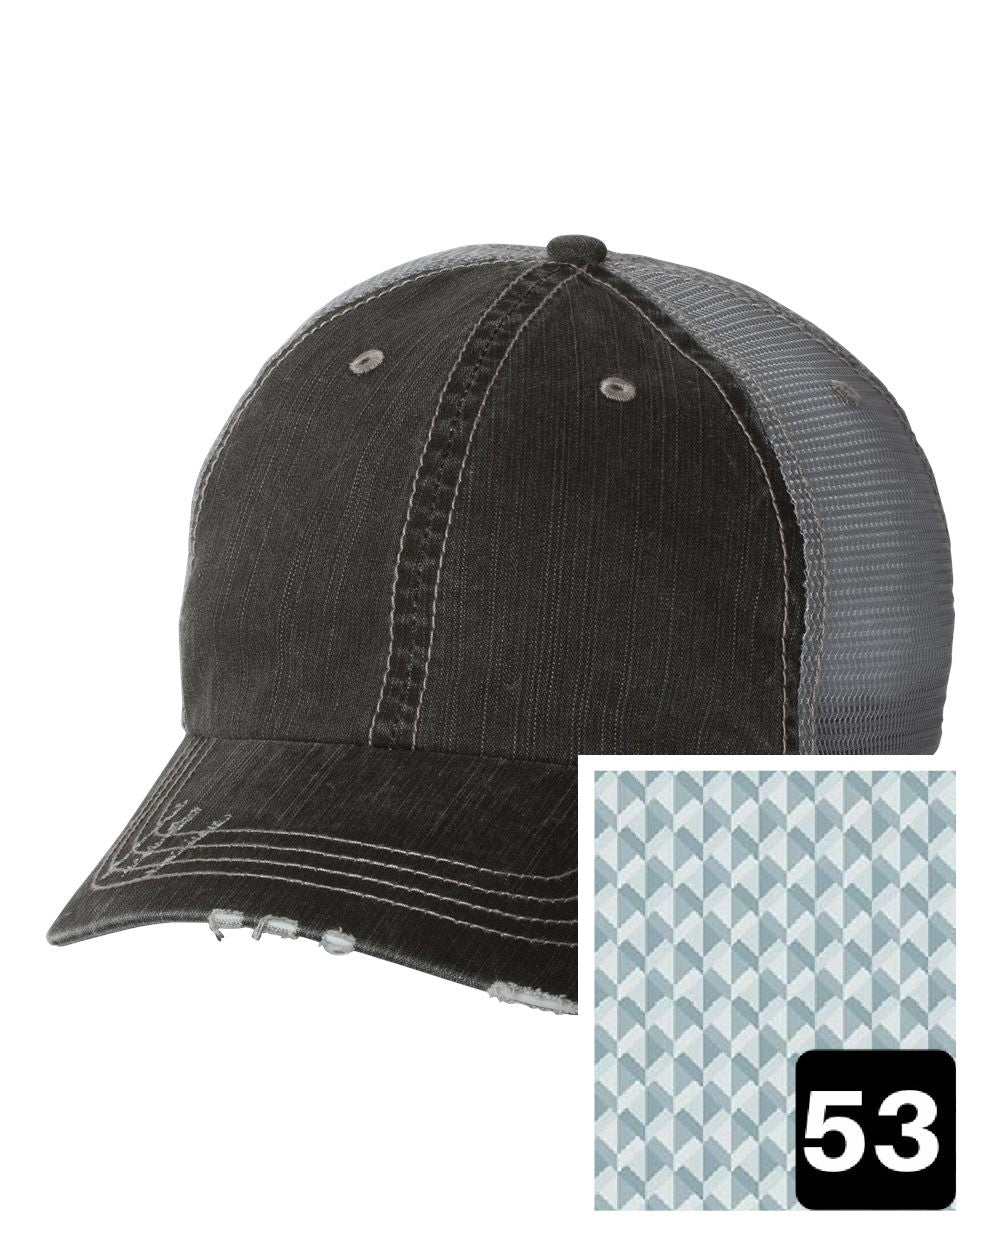 gray distressed trucker hat with multi-color stripe fabric state of Iowa